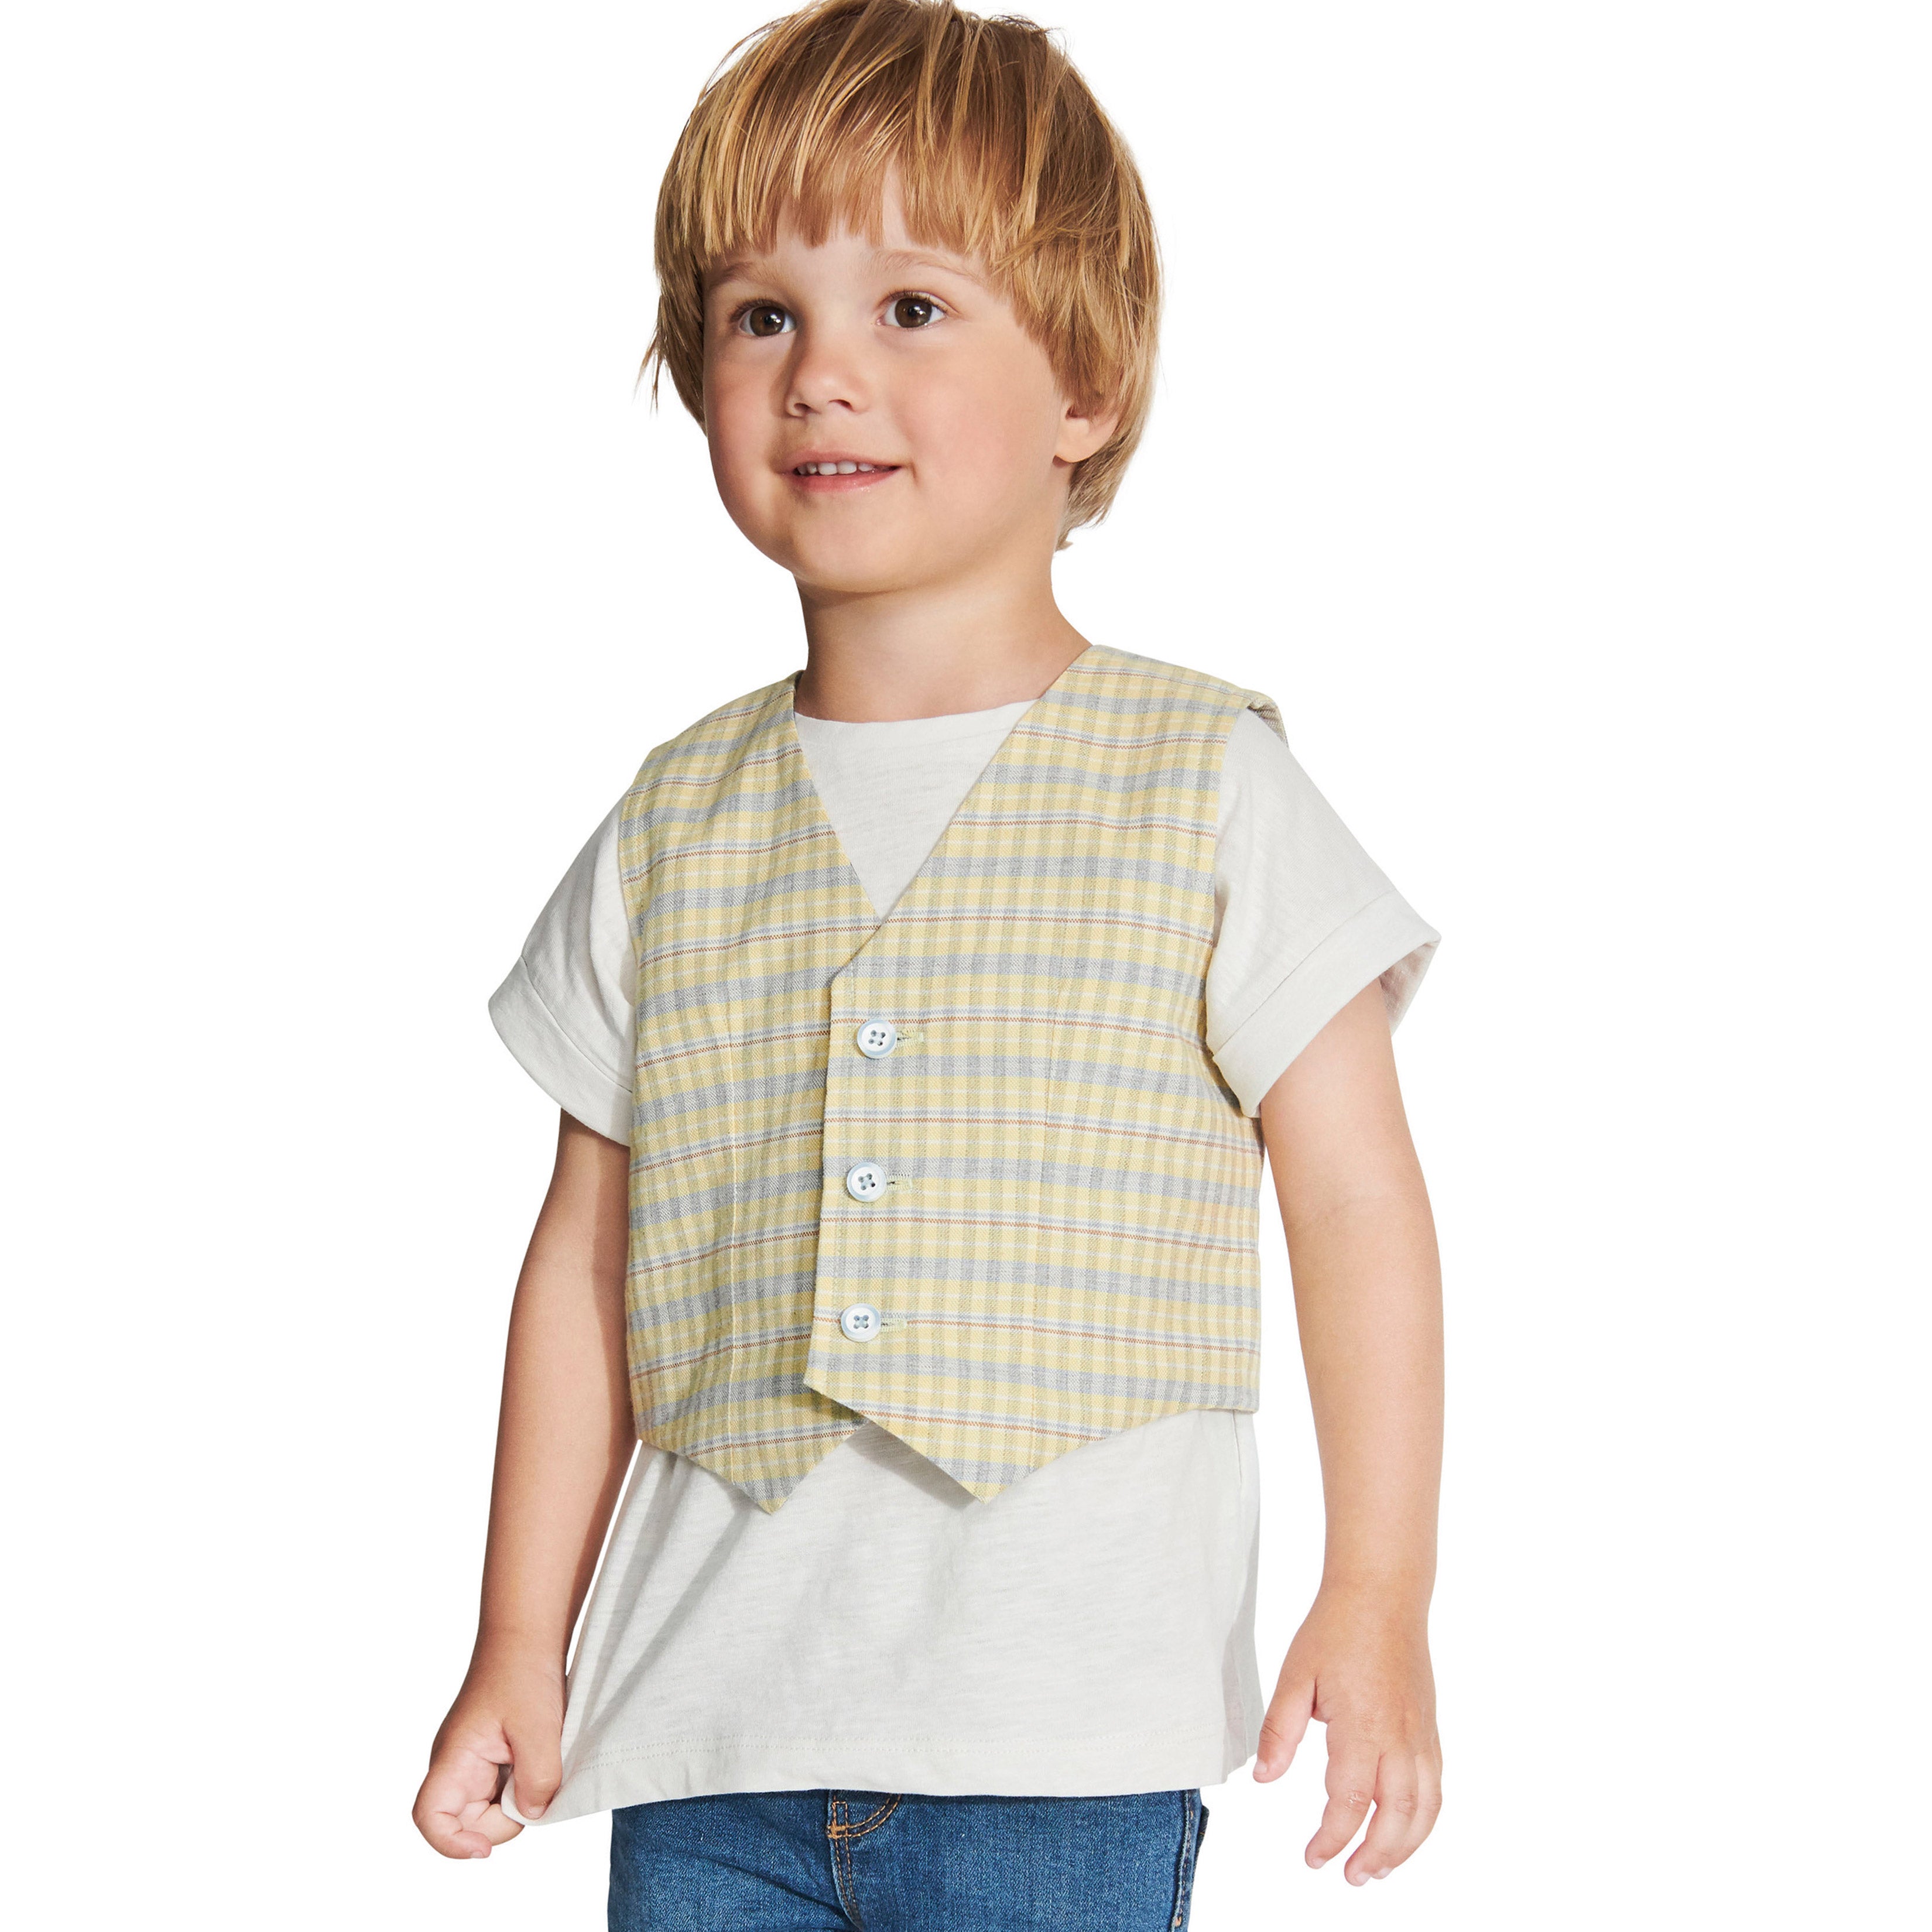 Burda Style Sewing Pattern 9248 Children's Shirt and Waistcoat from Jaycotts Sewing Supplies